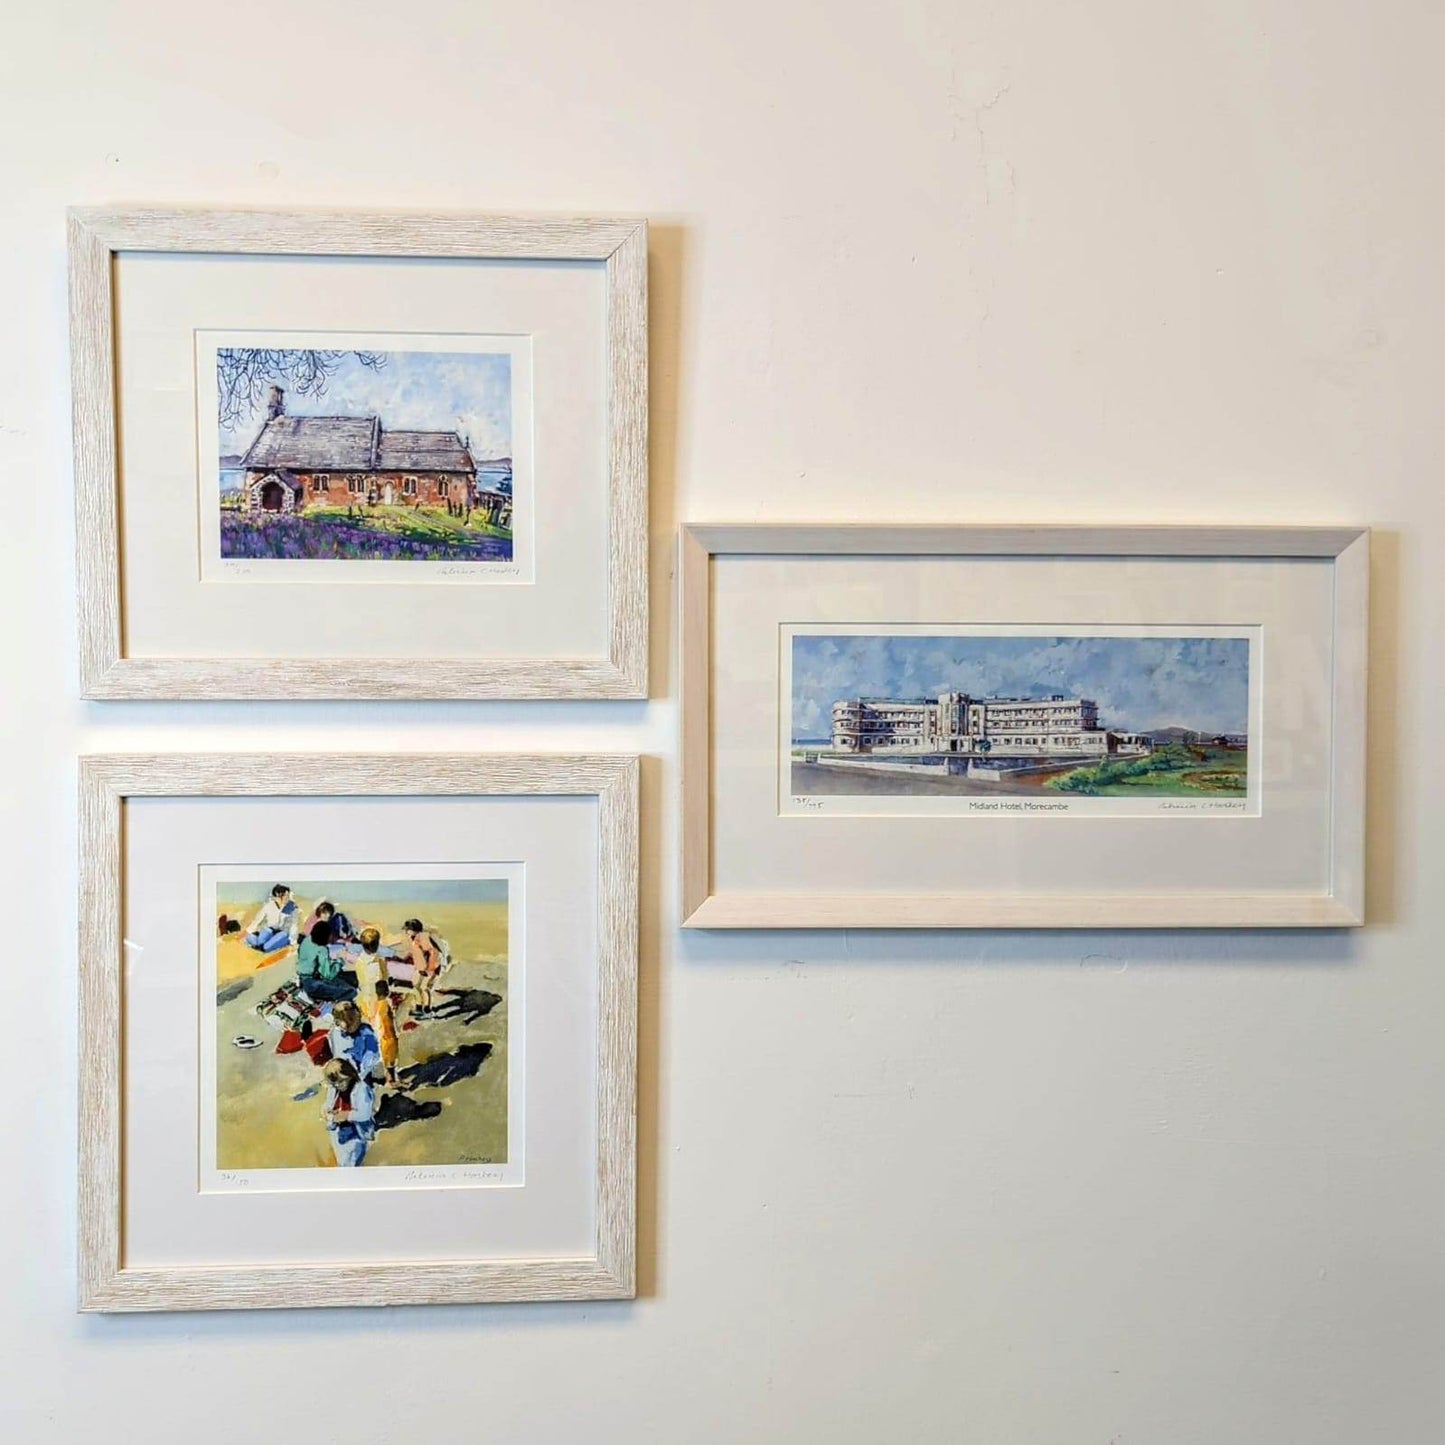 Framed limited edition Patricia Haskey 'Gilcee' prints